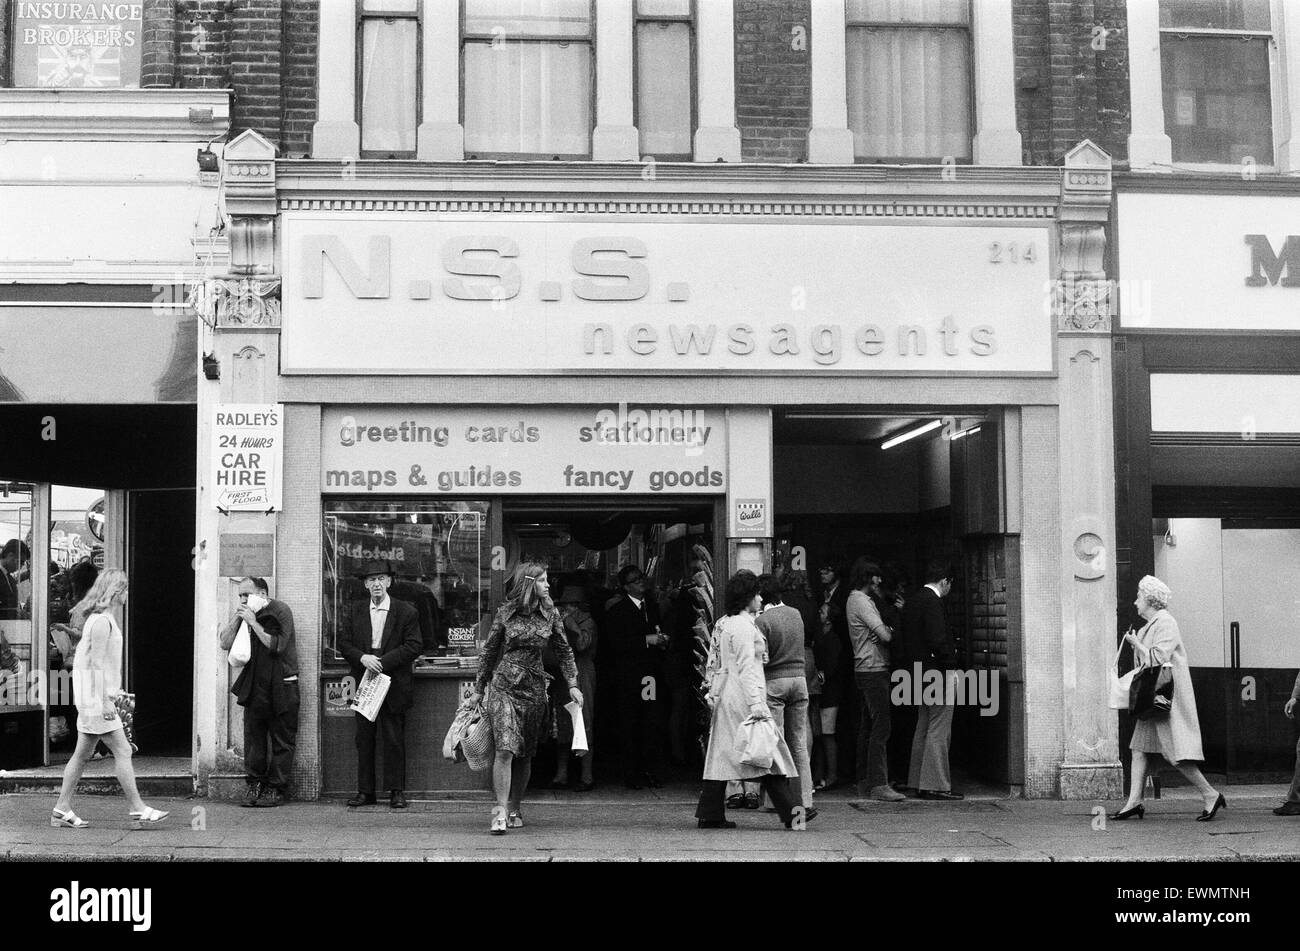 NSS Newsagents, Earls Court, London, 11th September 1971. Stock Photo